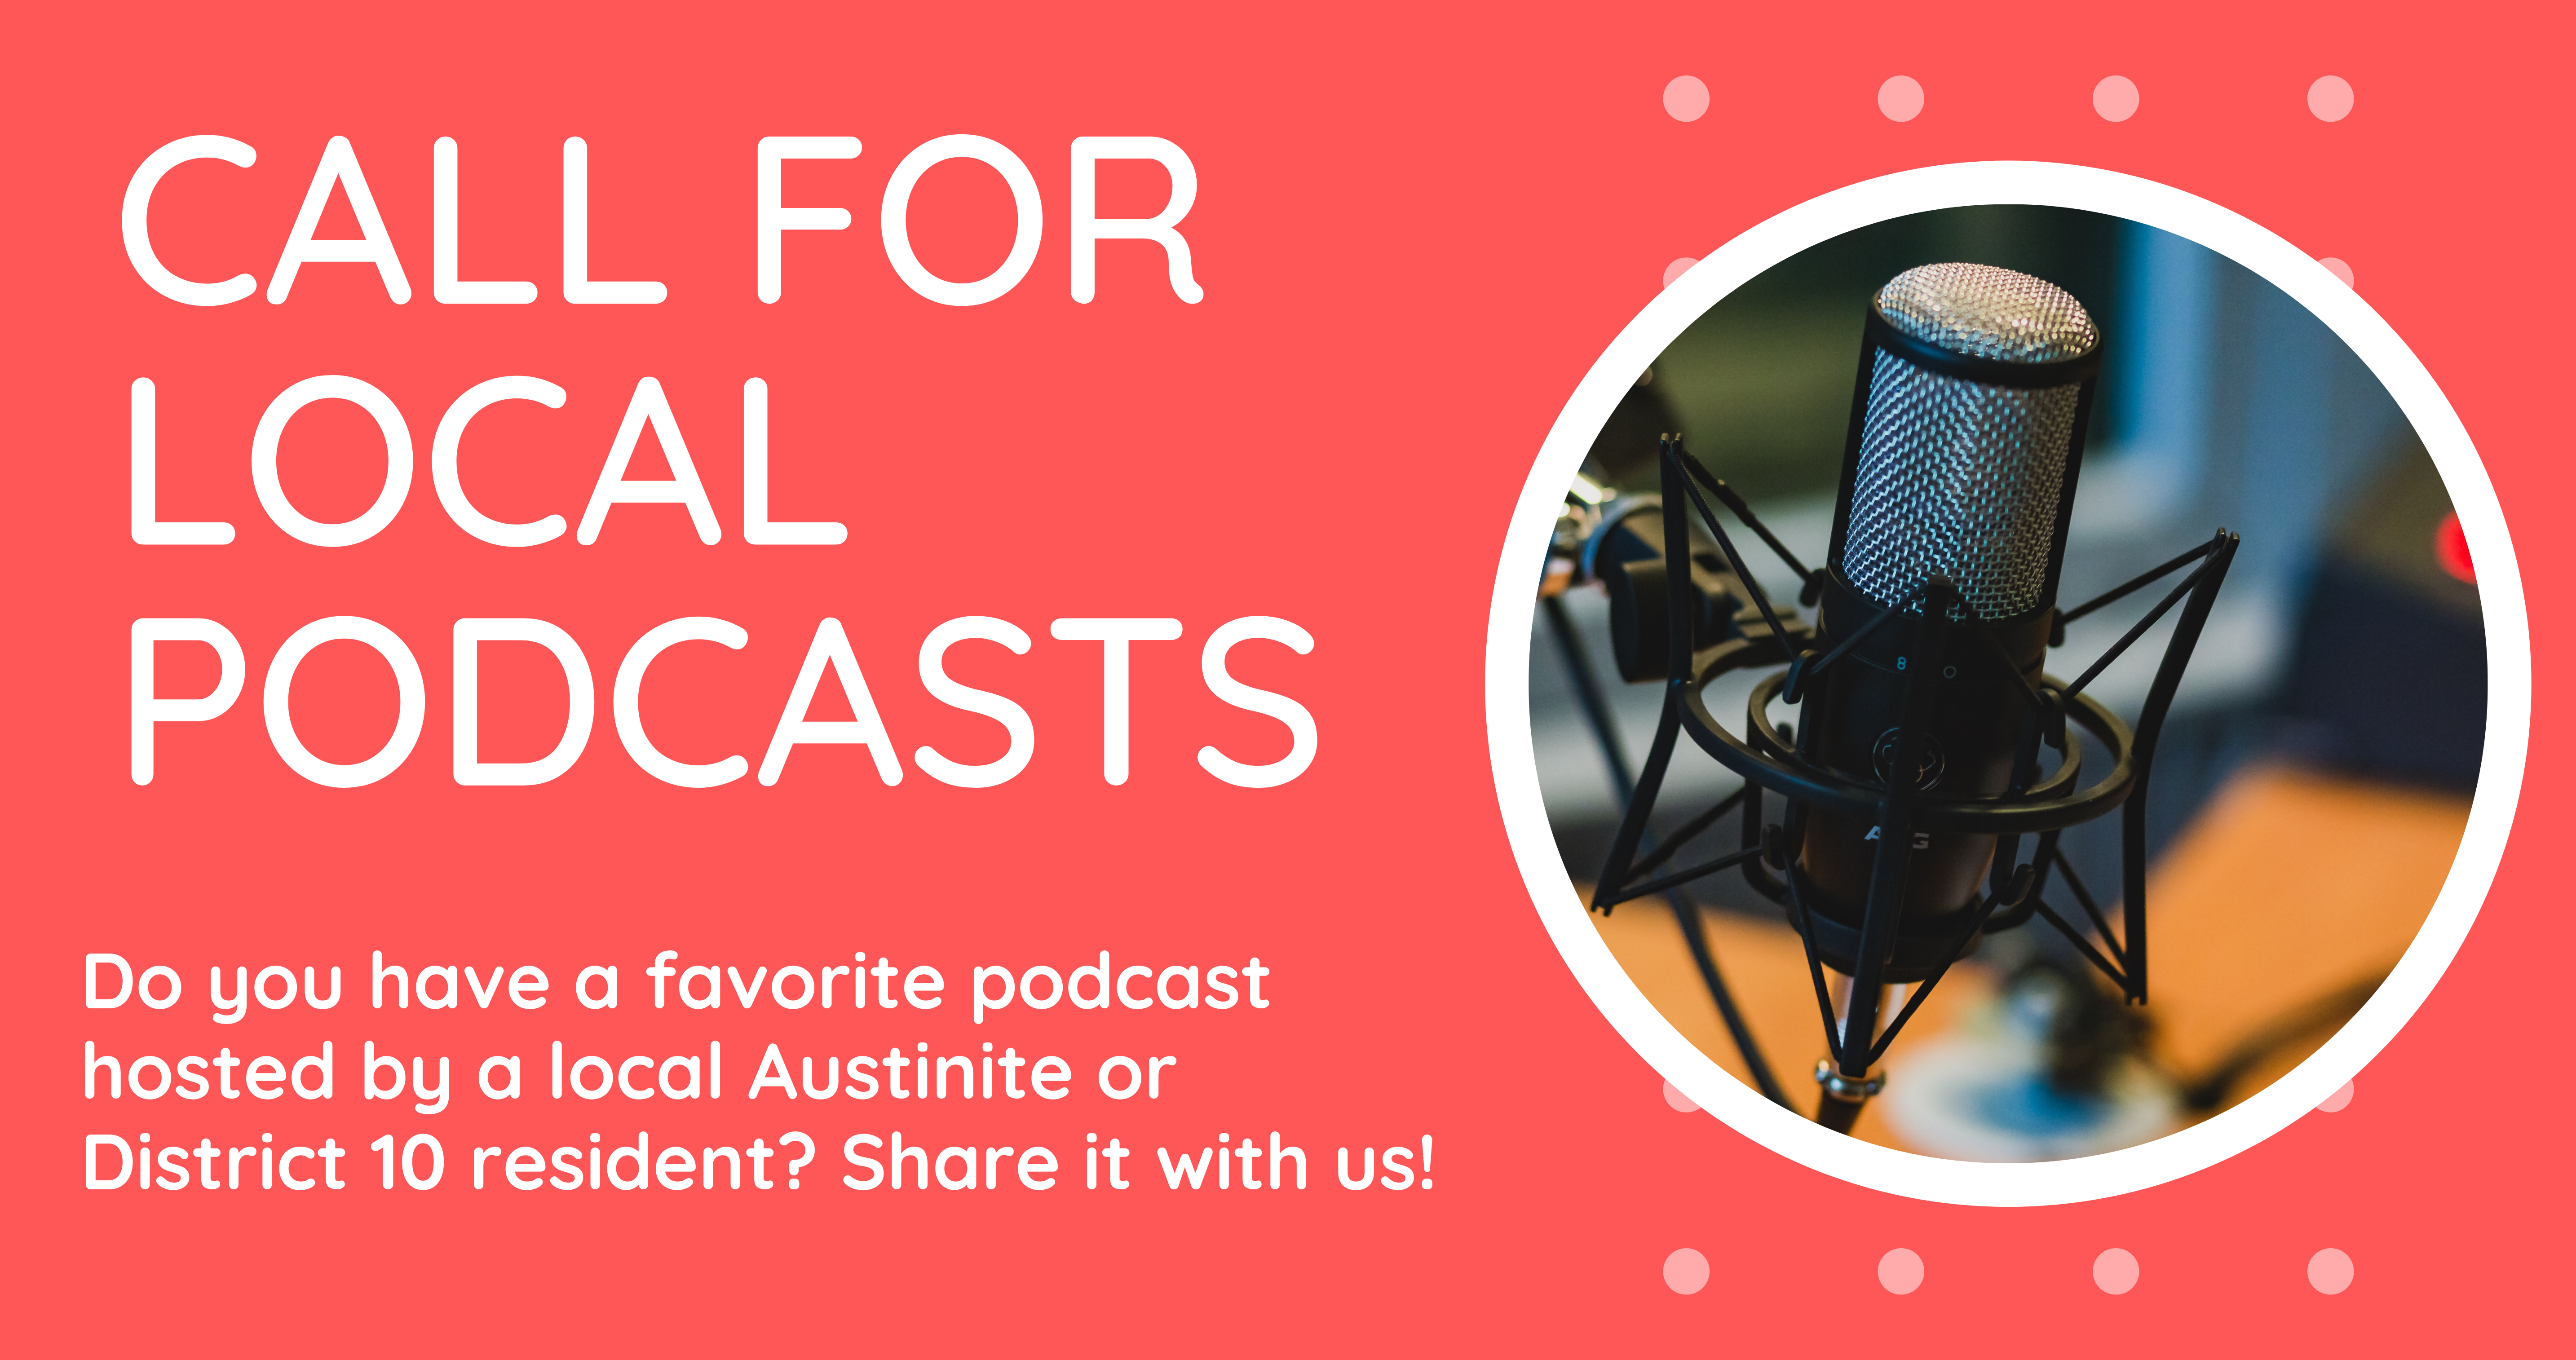 Call for Local Podcasts; Do you have a favorite podcast hosted by a local Austinite or District 10 resident? Share it with us!